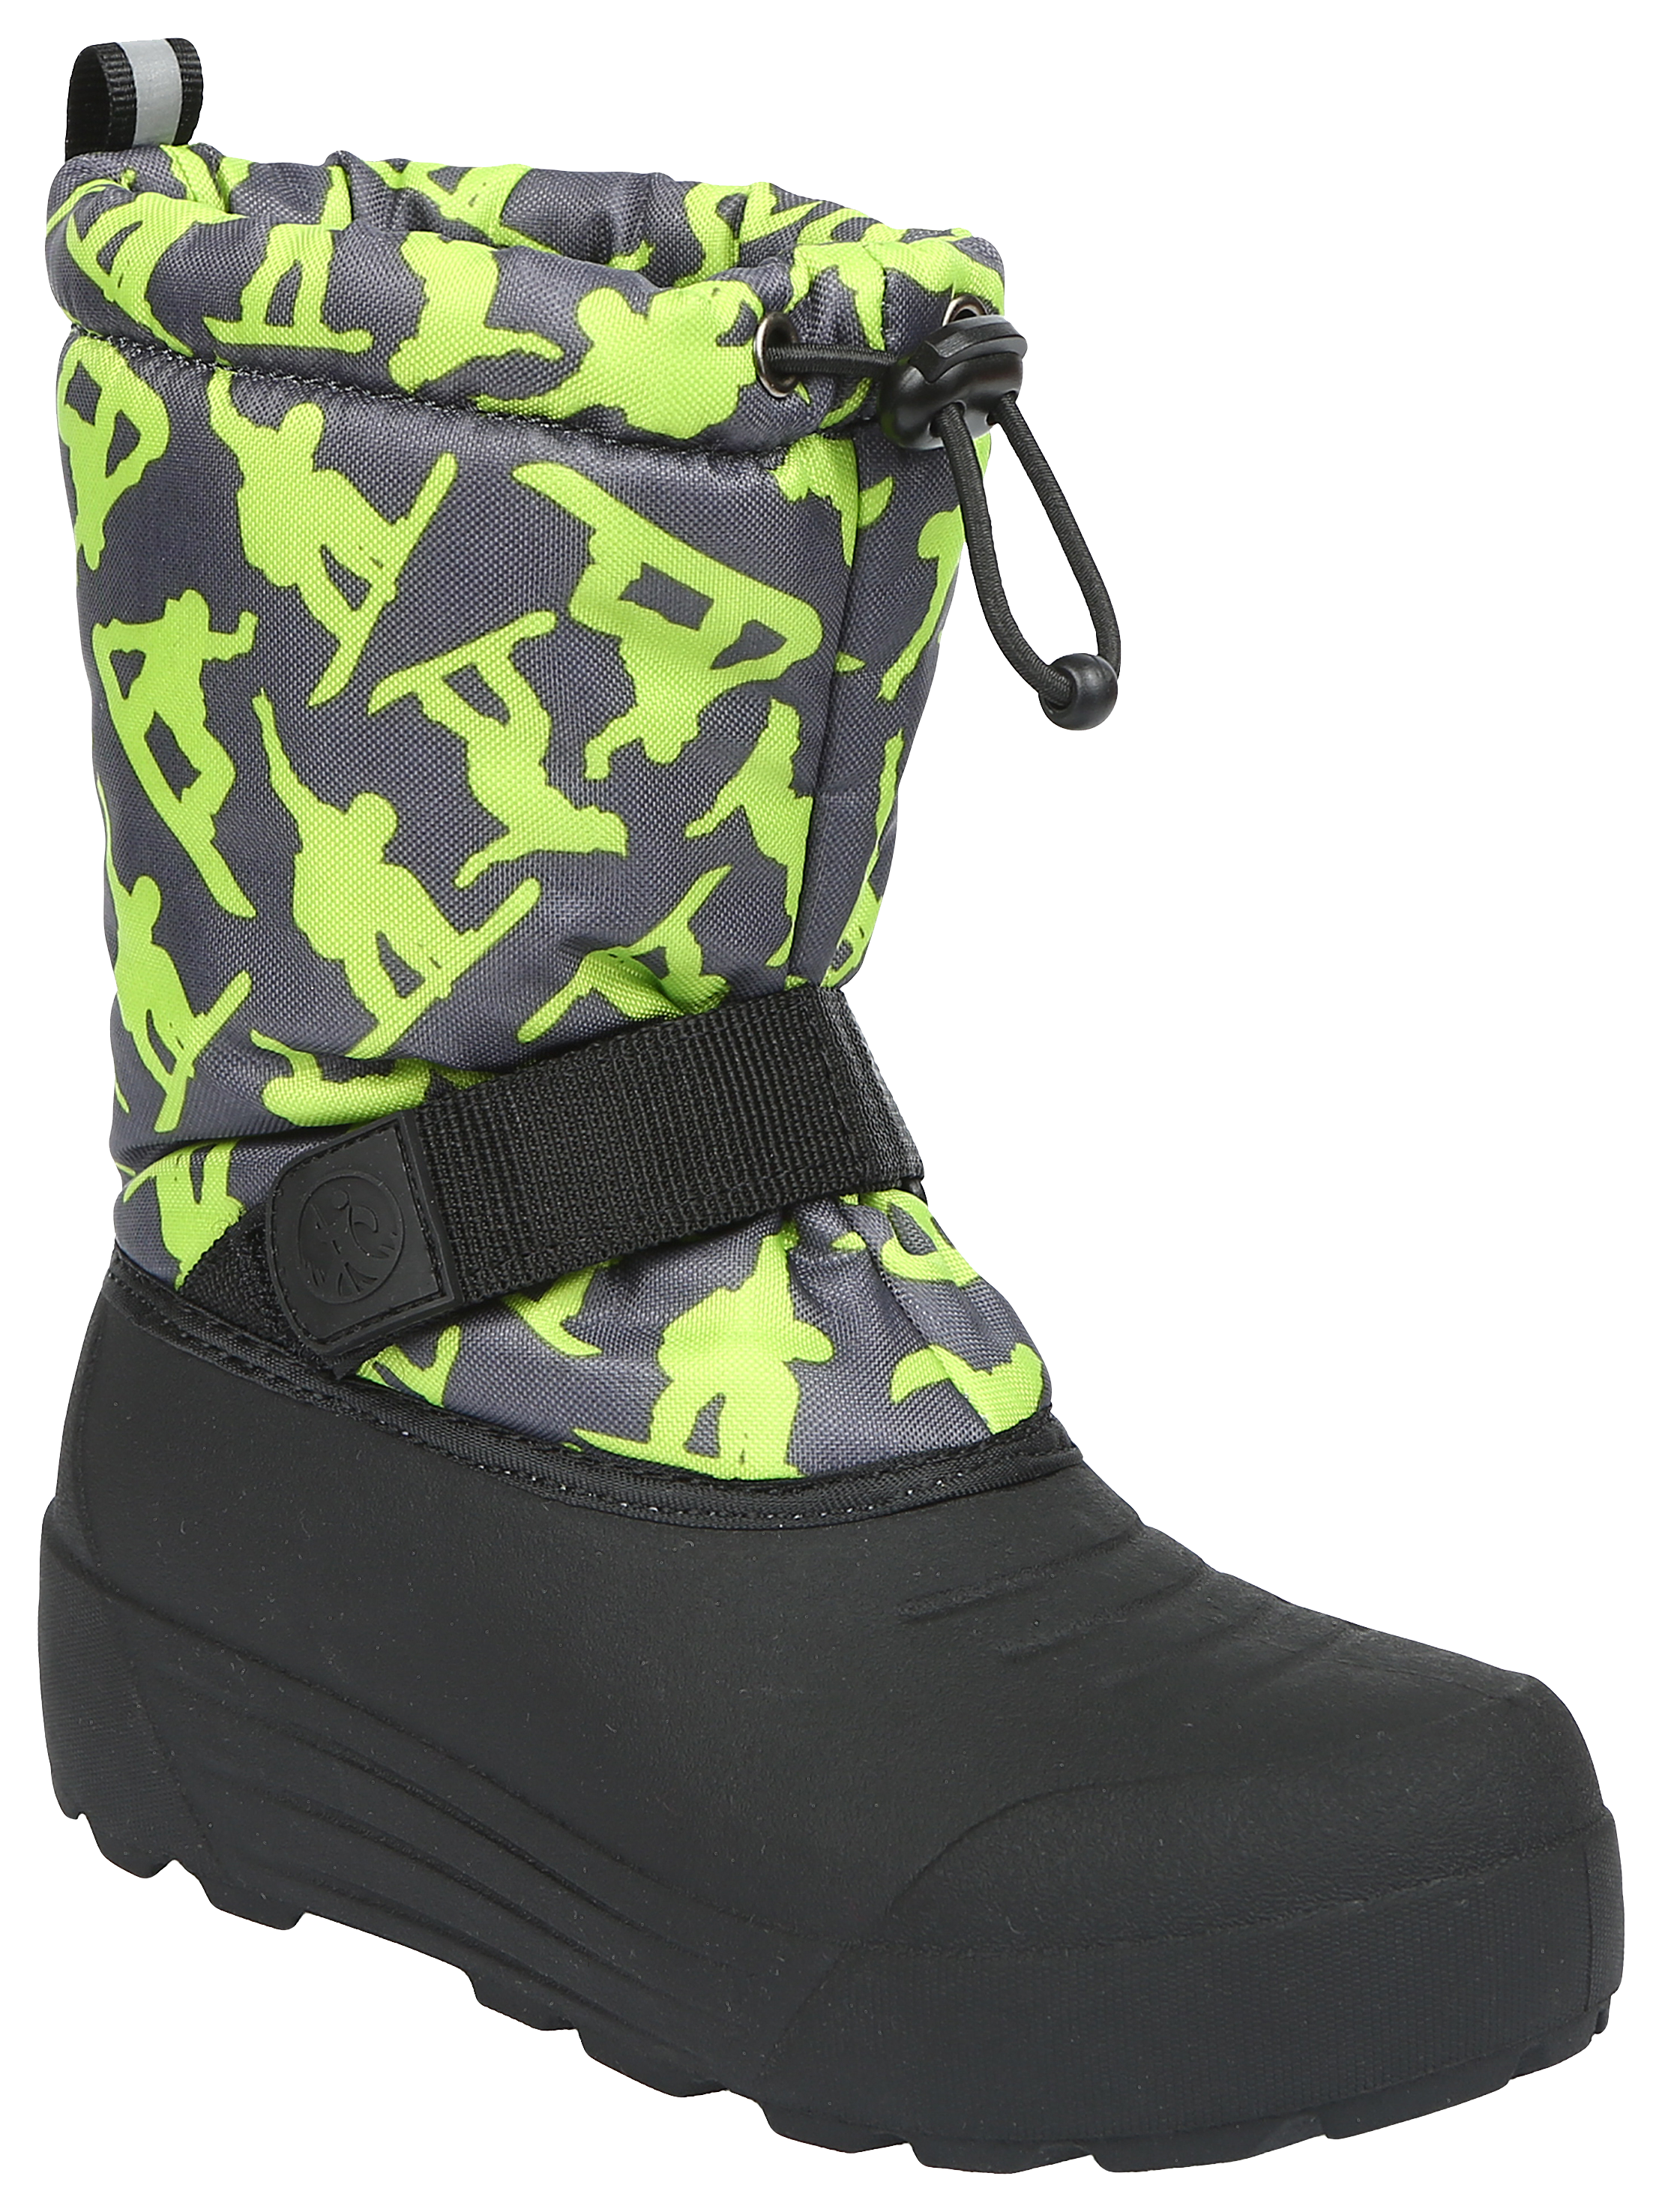 Northside Frosty Insulated Pac Boots for Kids - Dark Gray/Green - 4 Kids